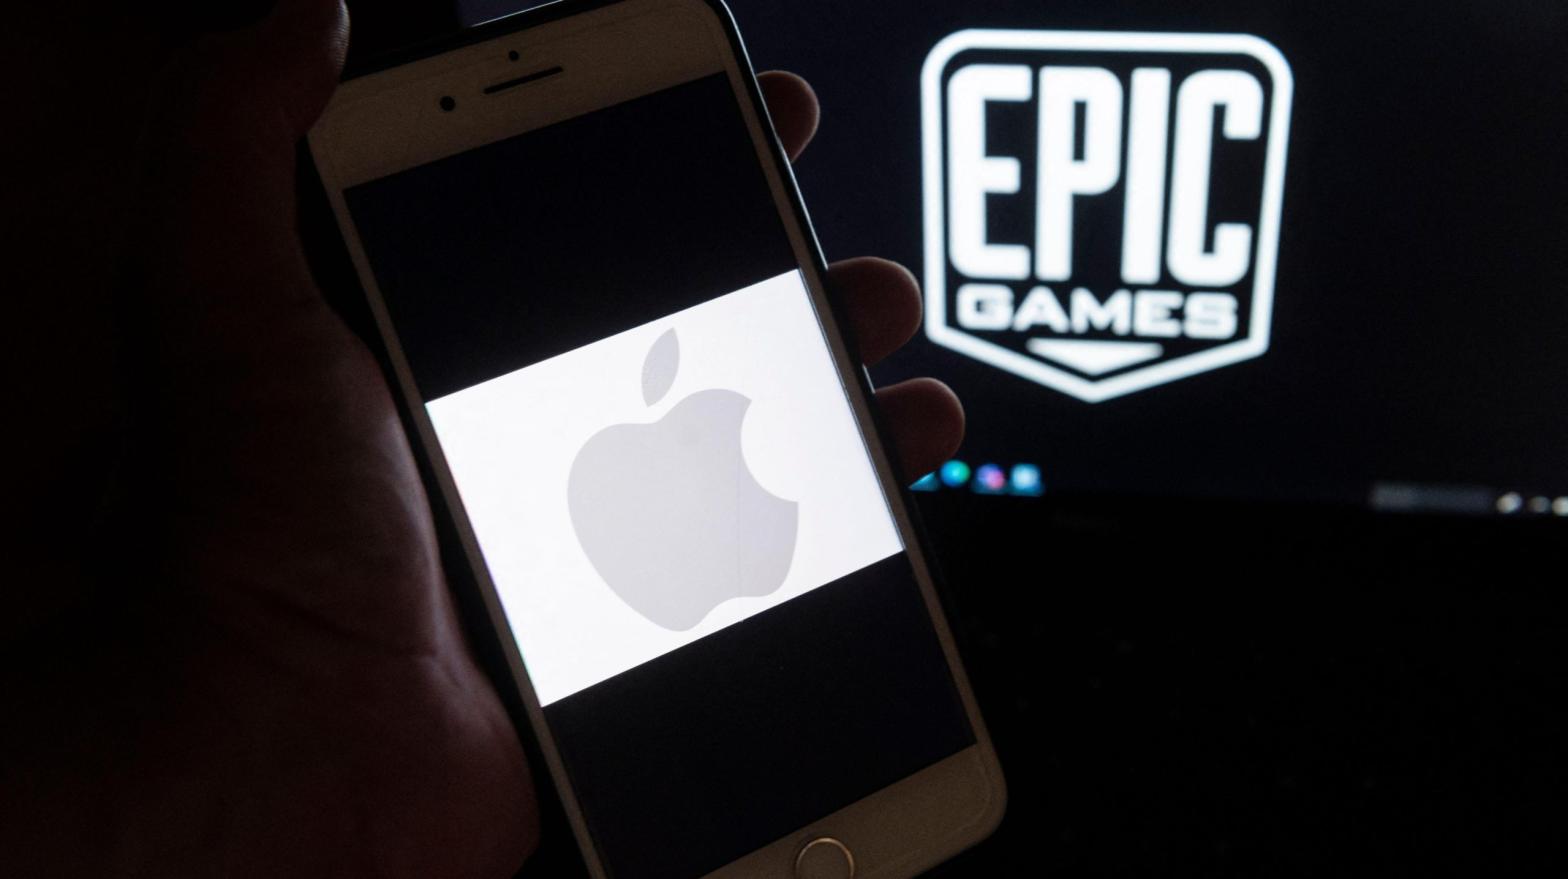 The Apple logo on an iPhone alongside the Epic Games logo on a laptop, April 2021. (Photo: Andrew Caballero-Reynolds / AFP, Getty Images)